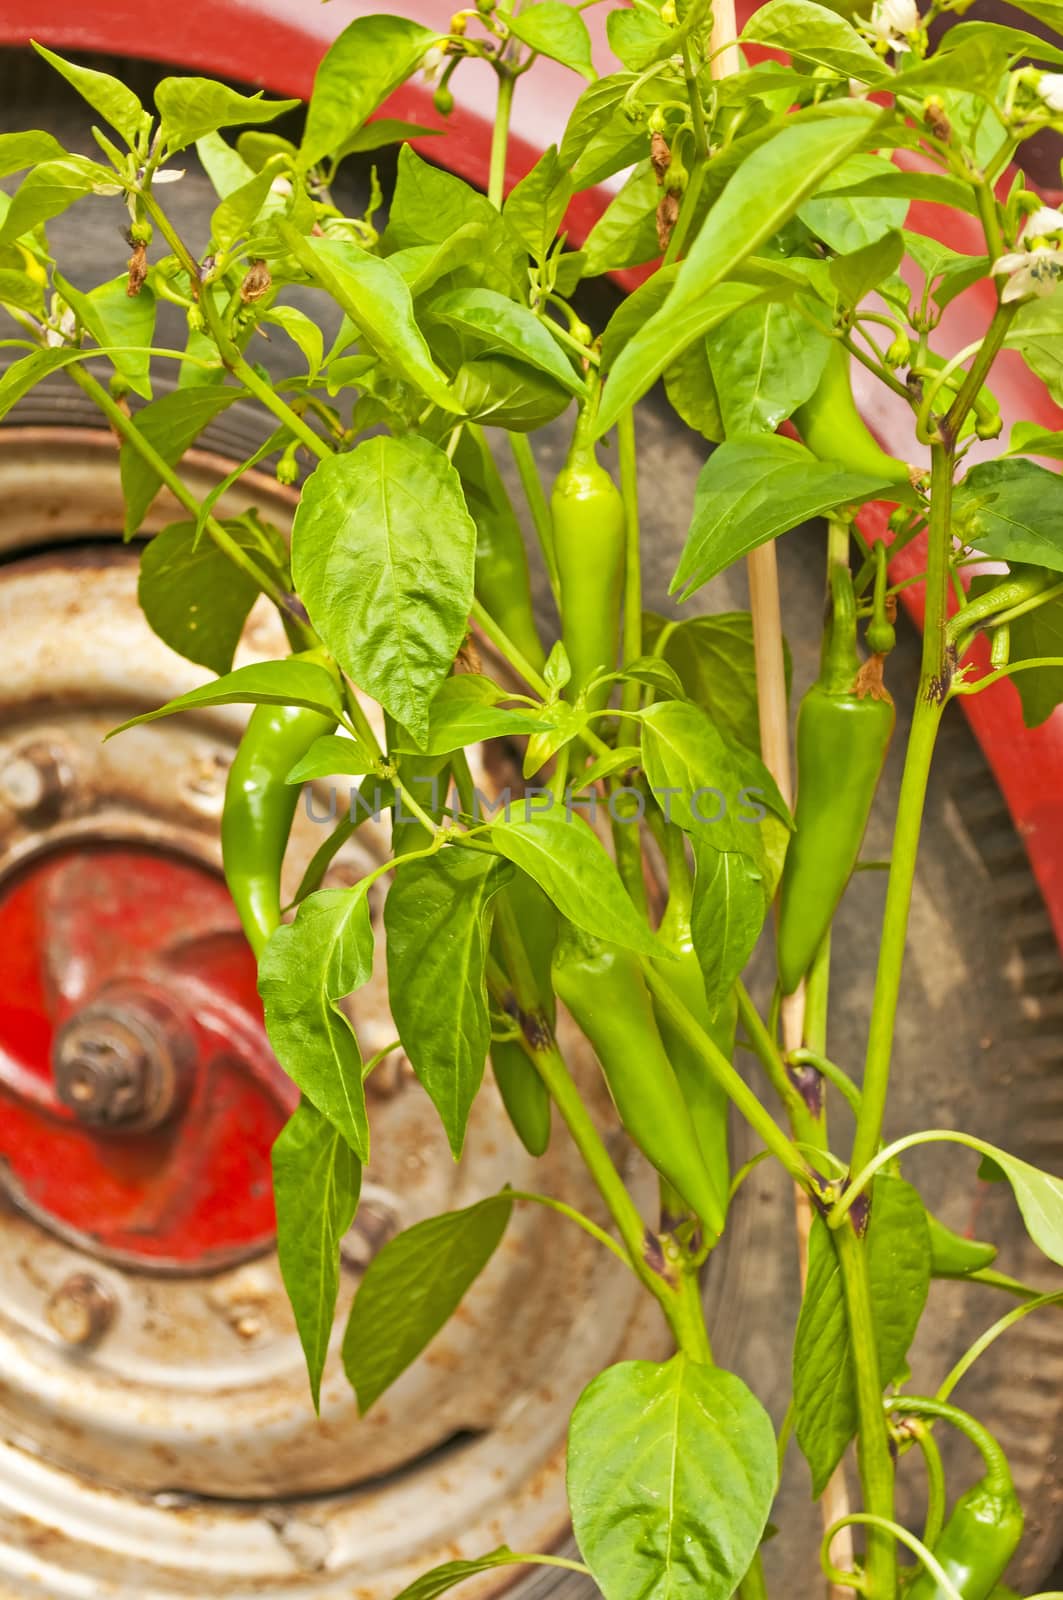 chili with car by Jochen